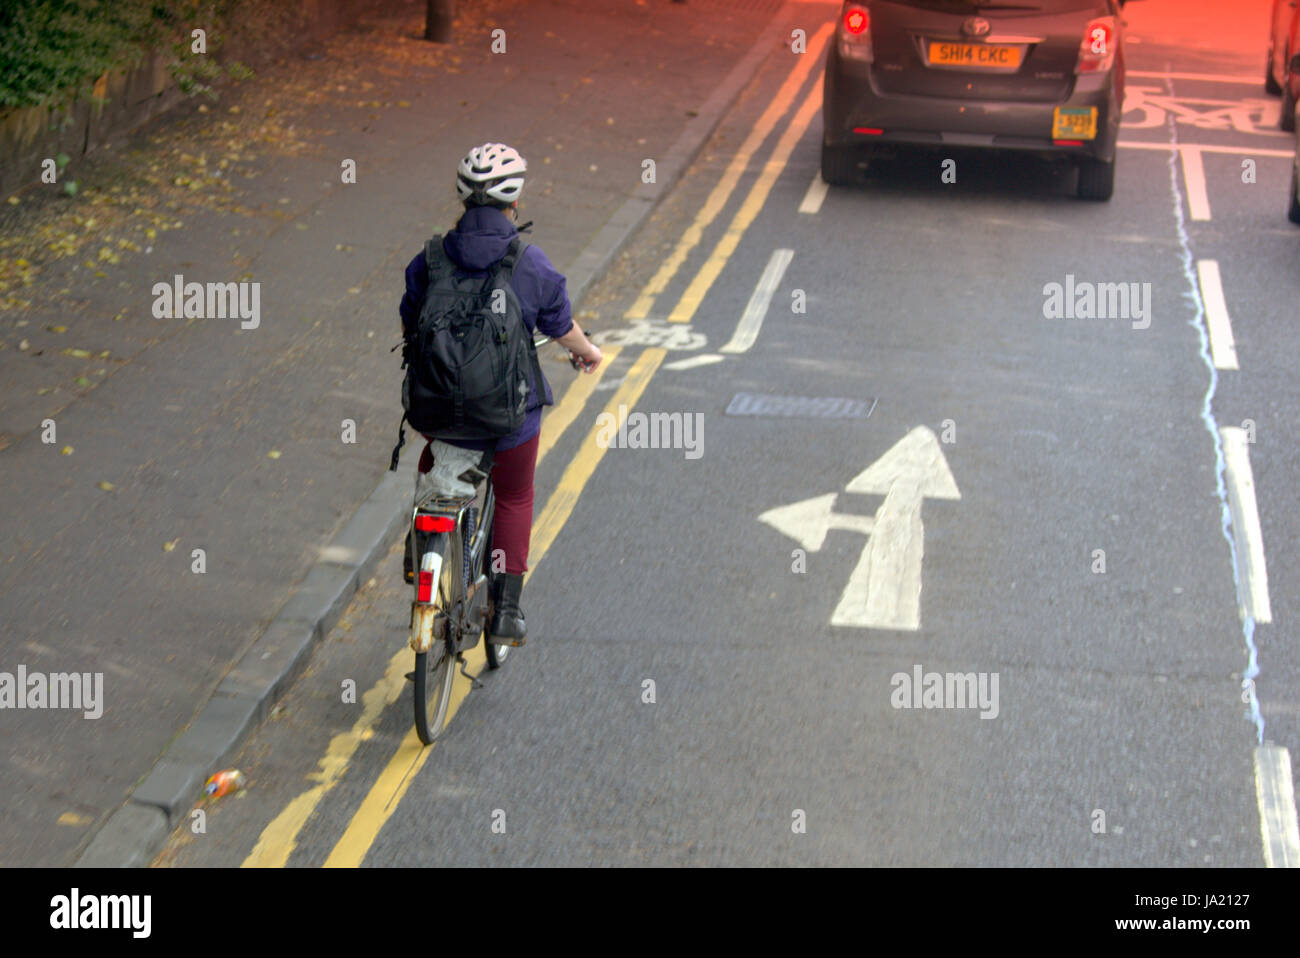 Young girl on bike cyclist in busy road traffic near bike lane and danger Stock Photo